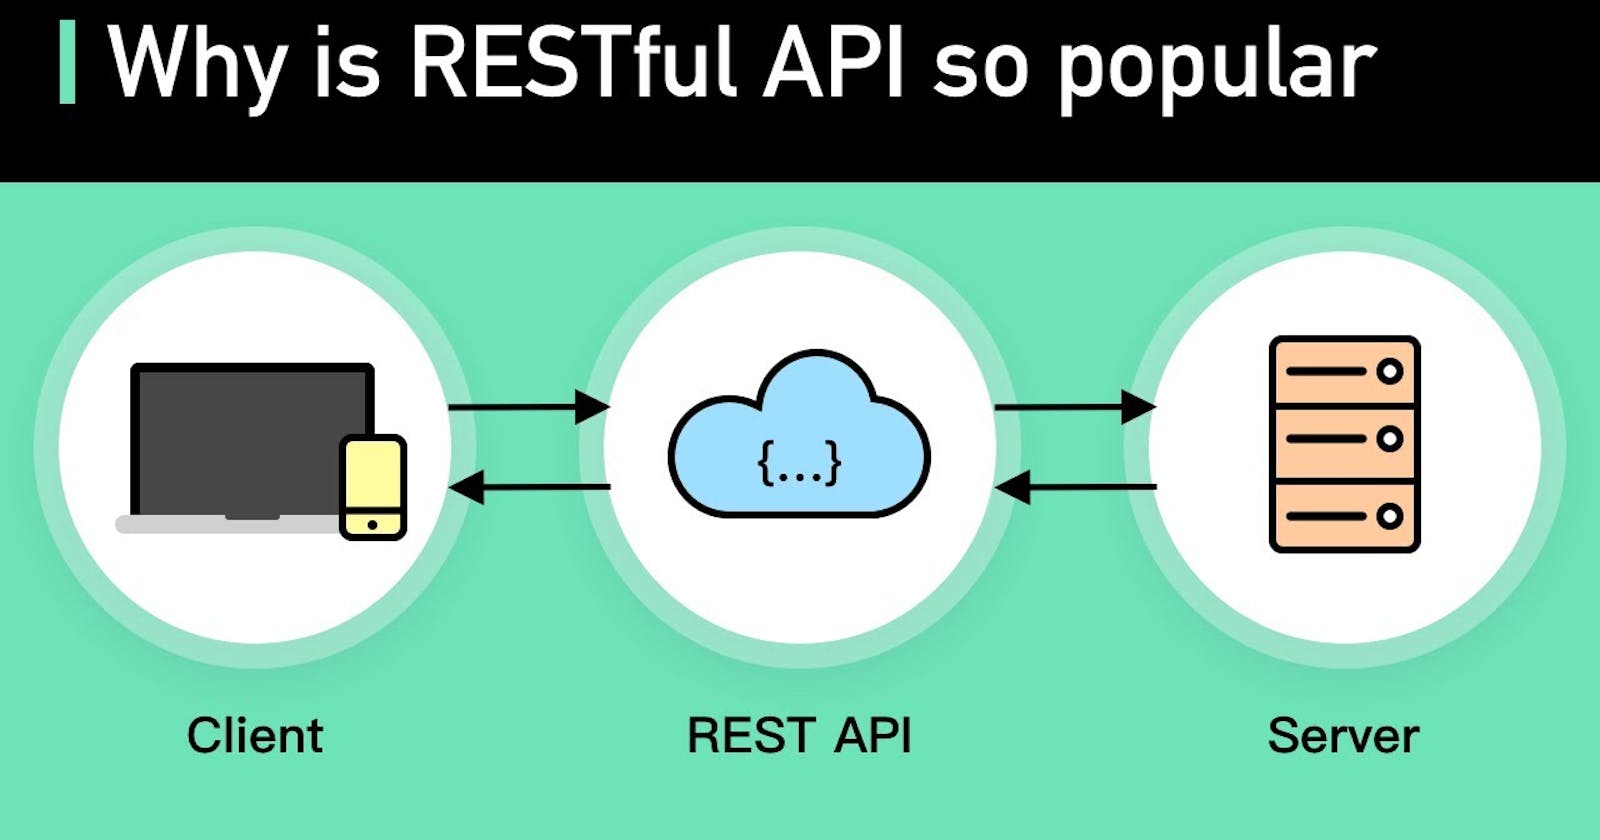 REST API and their CRUD Operations